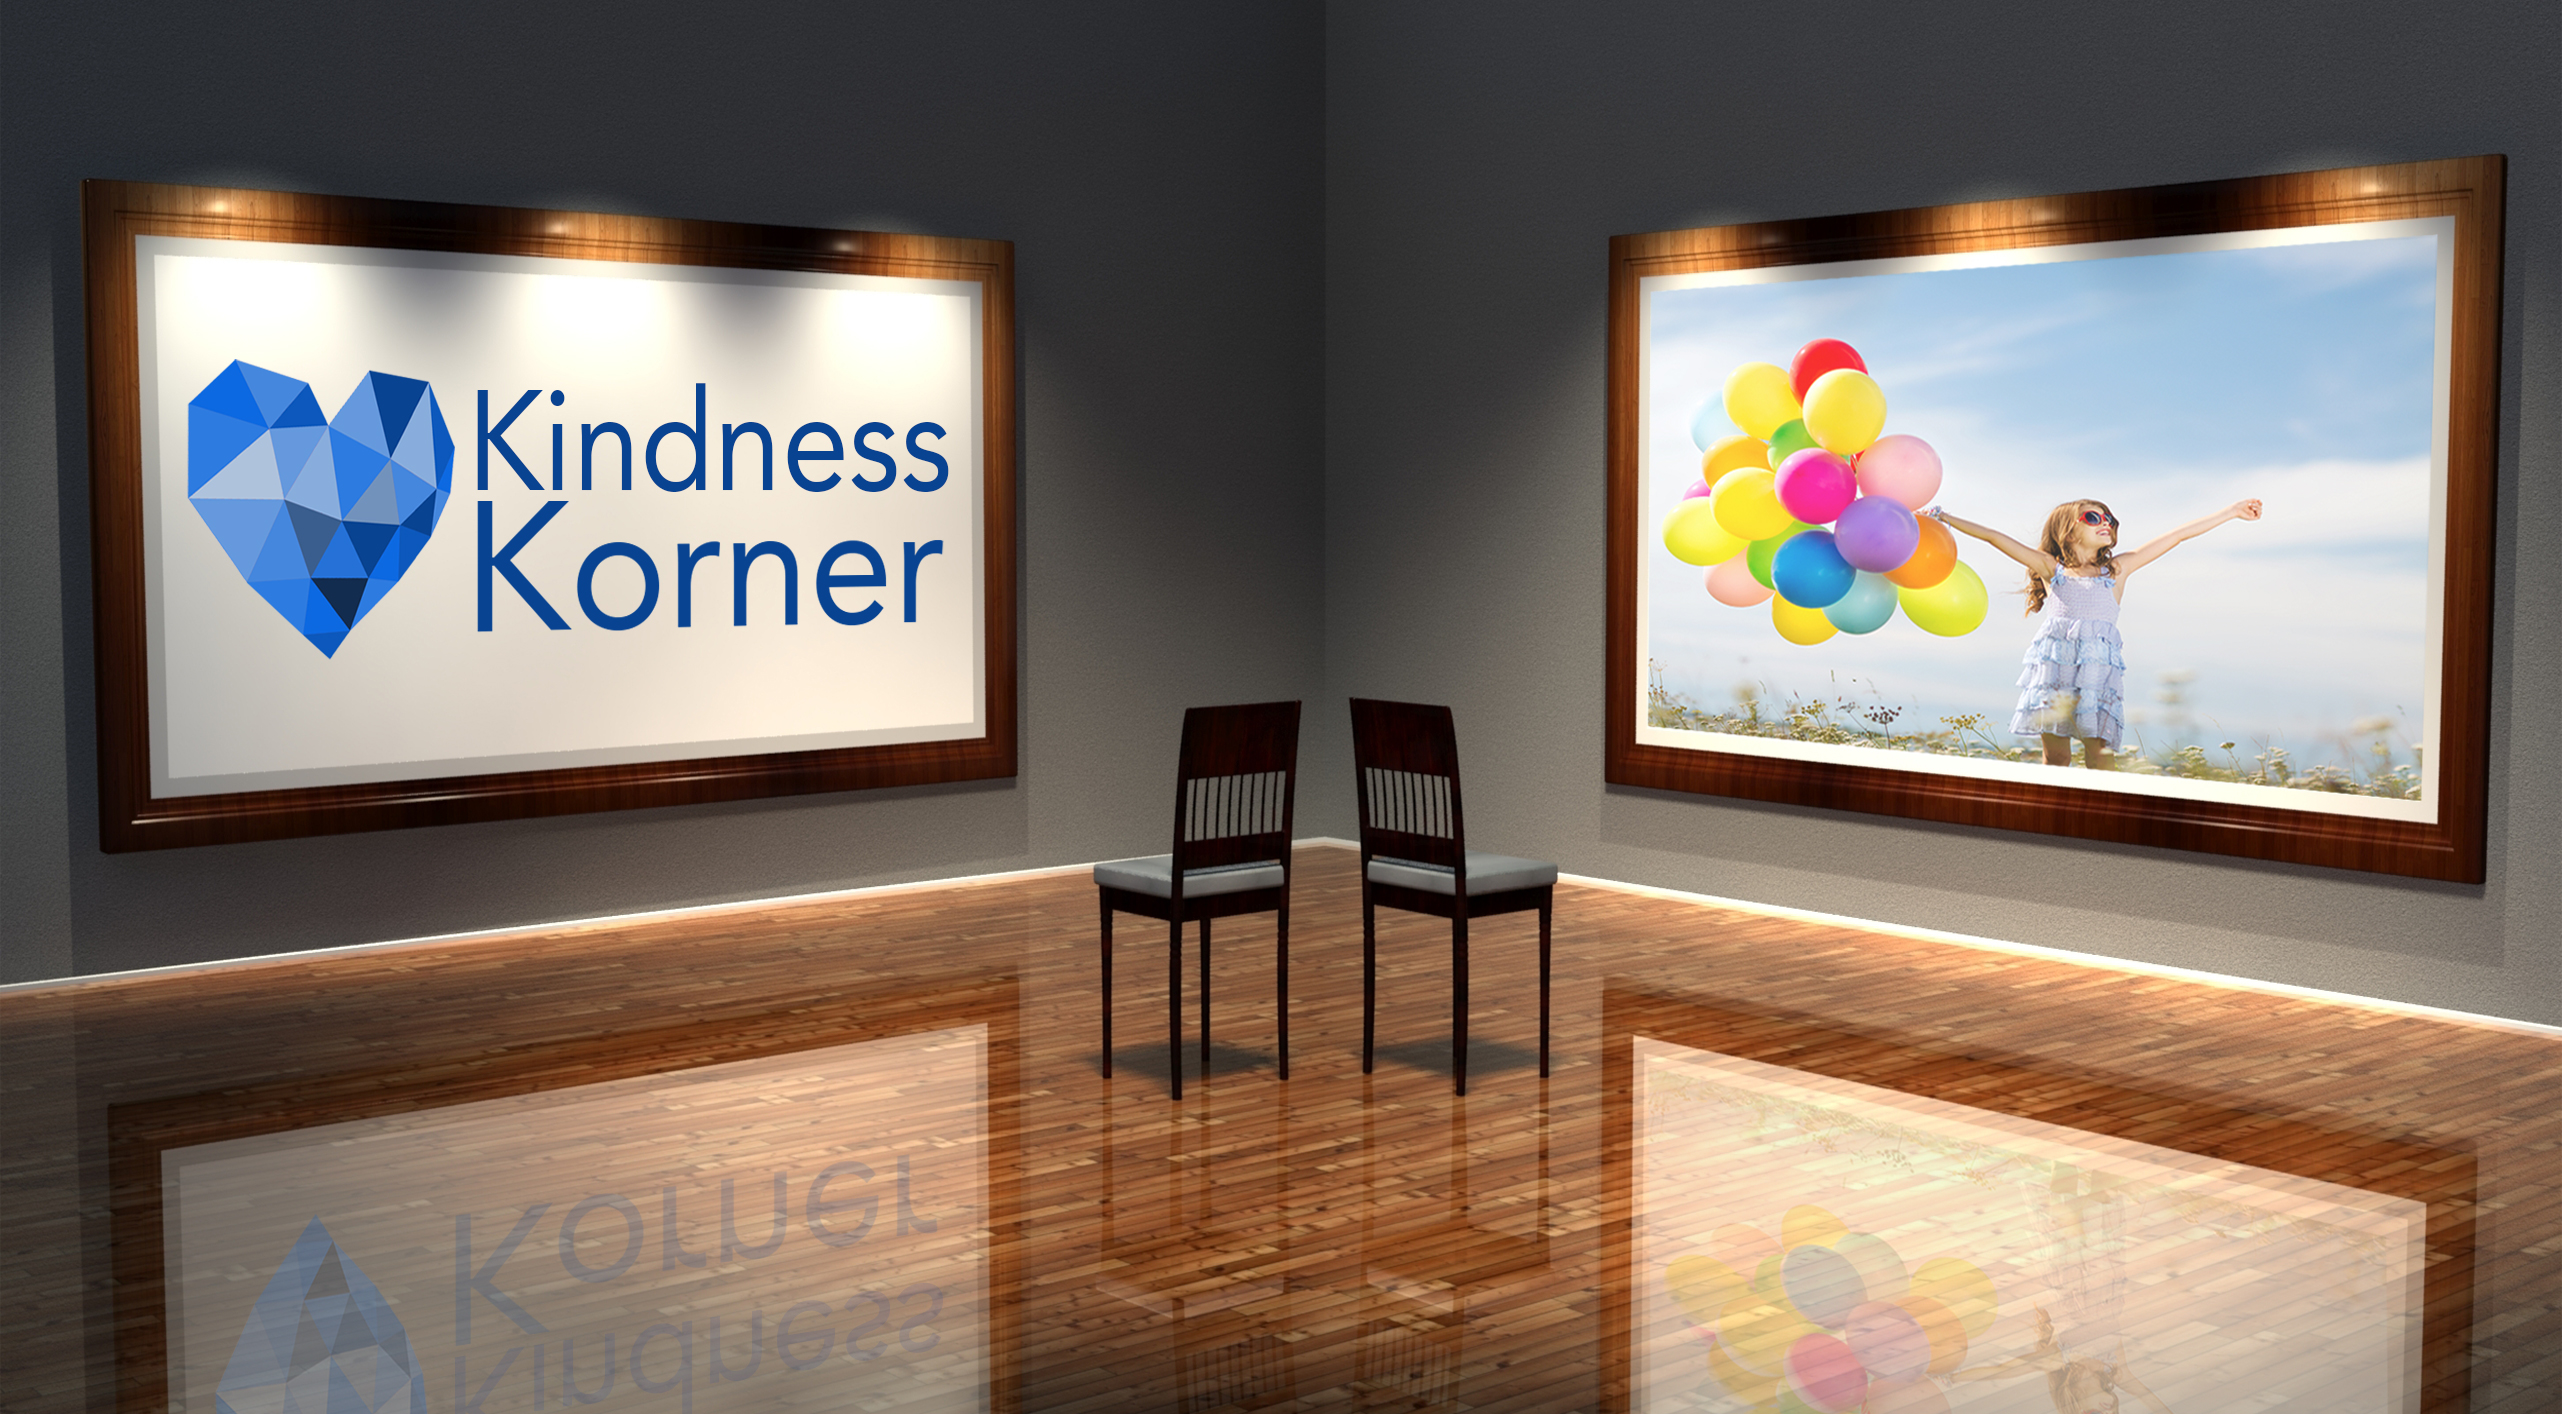 A graphic showing the Kindness Korner logo and a girl with balloons